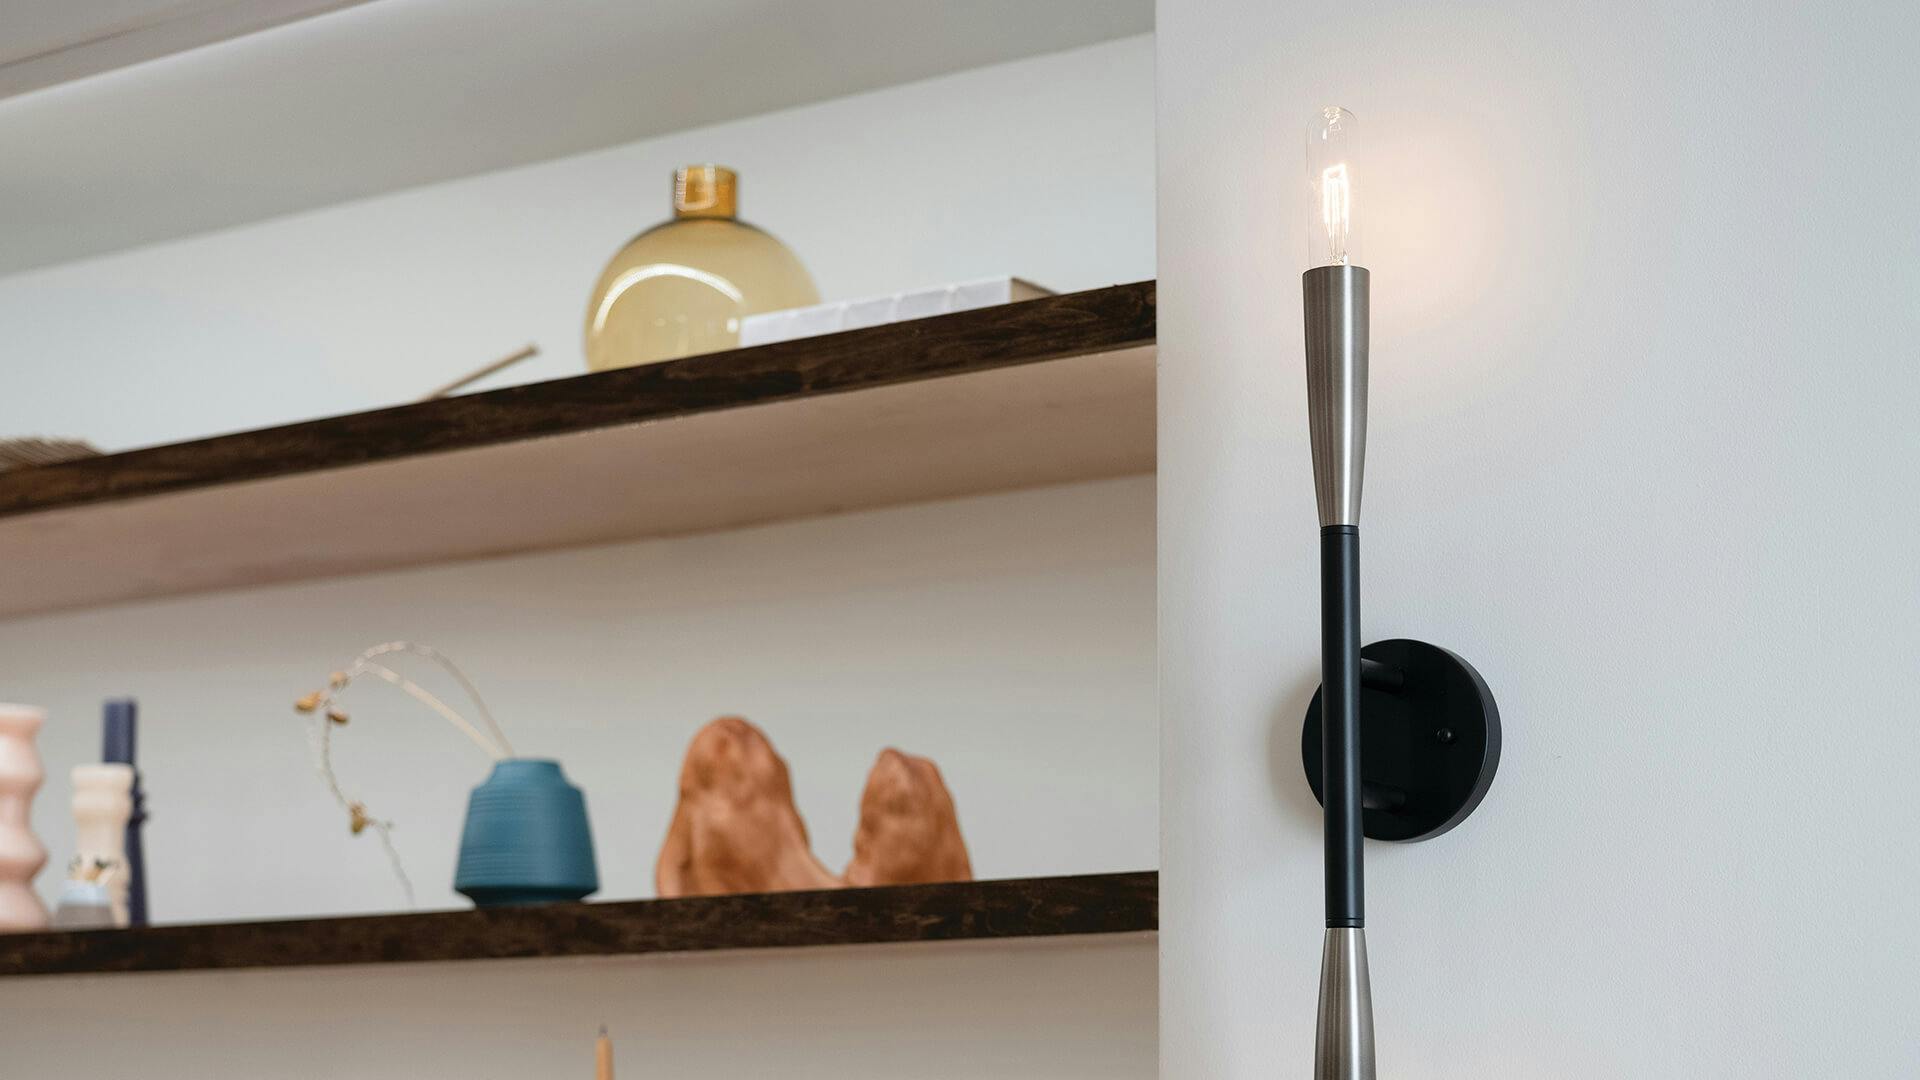 Shelving with various items on them with a lit Branches sconce nearby